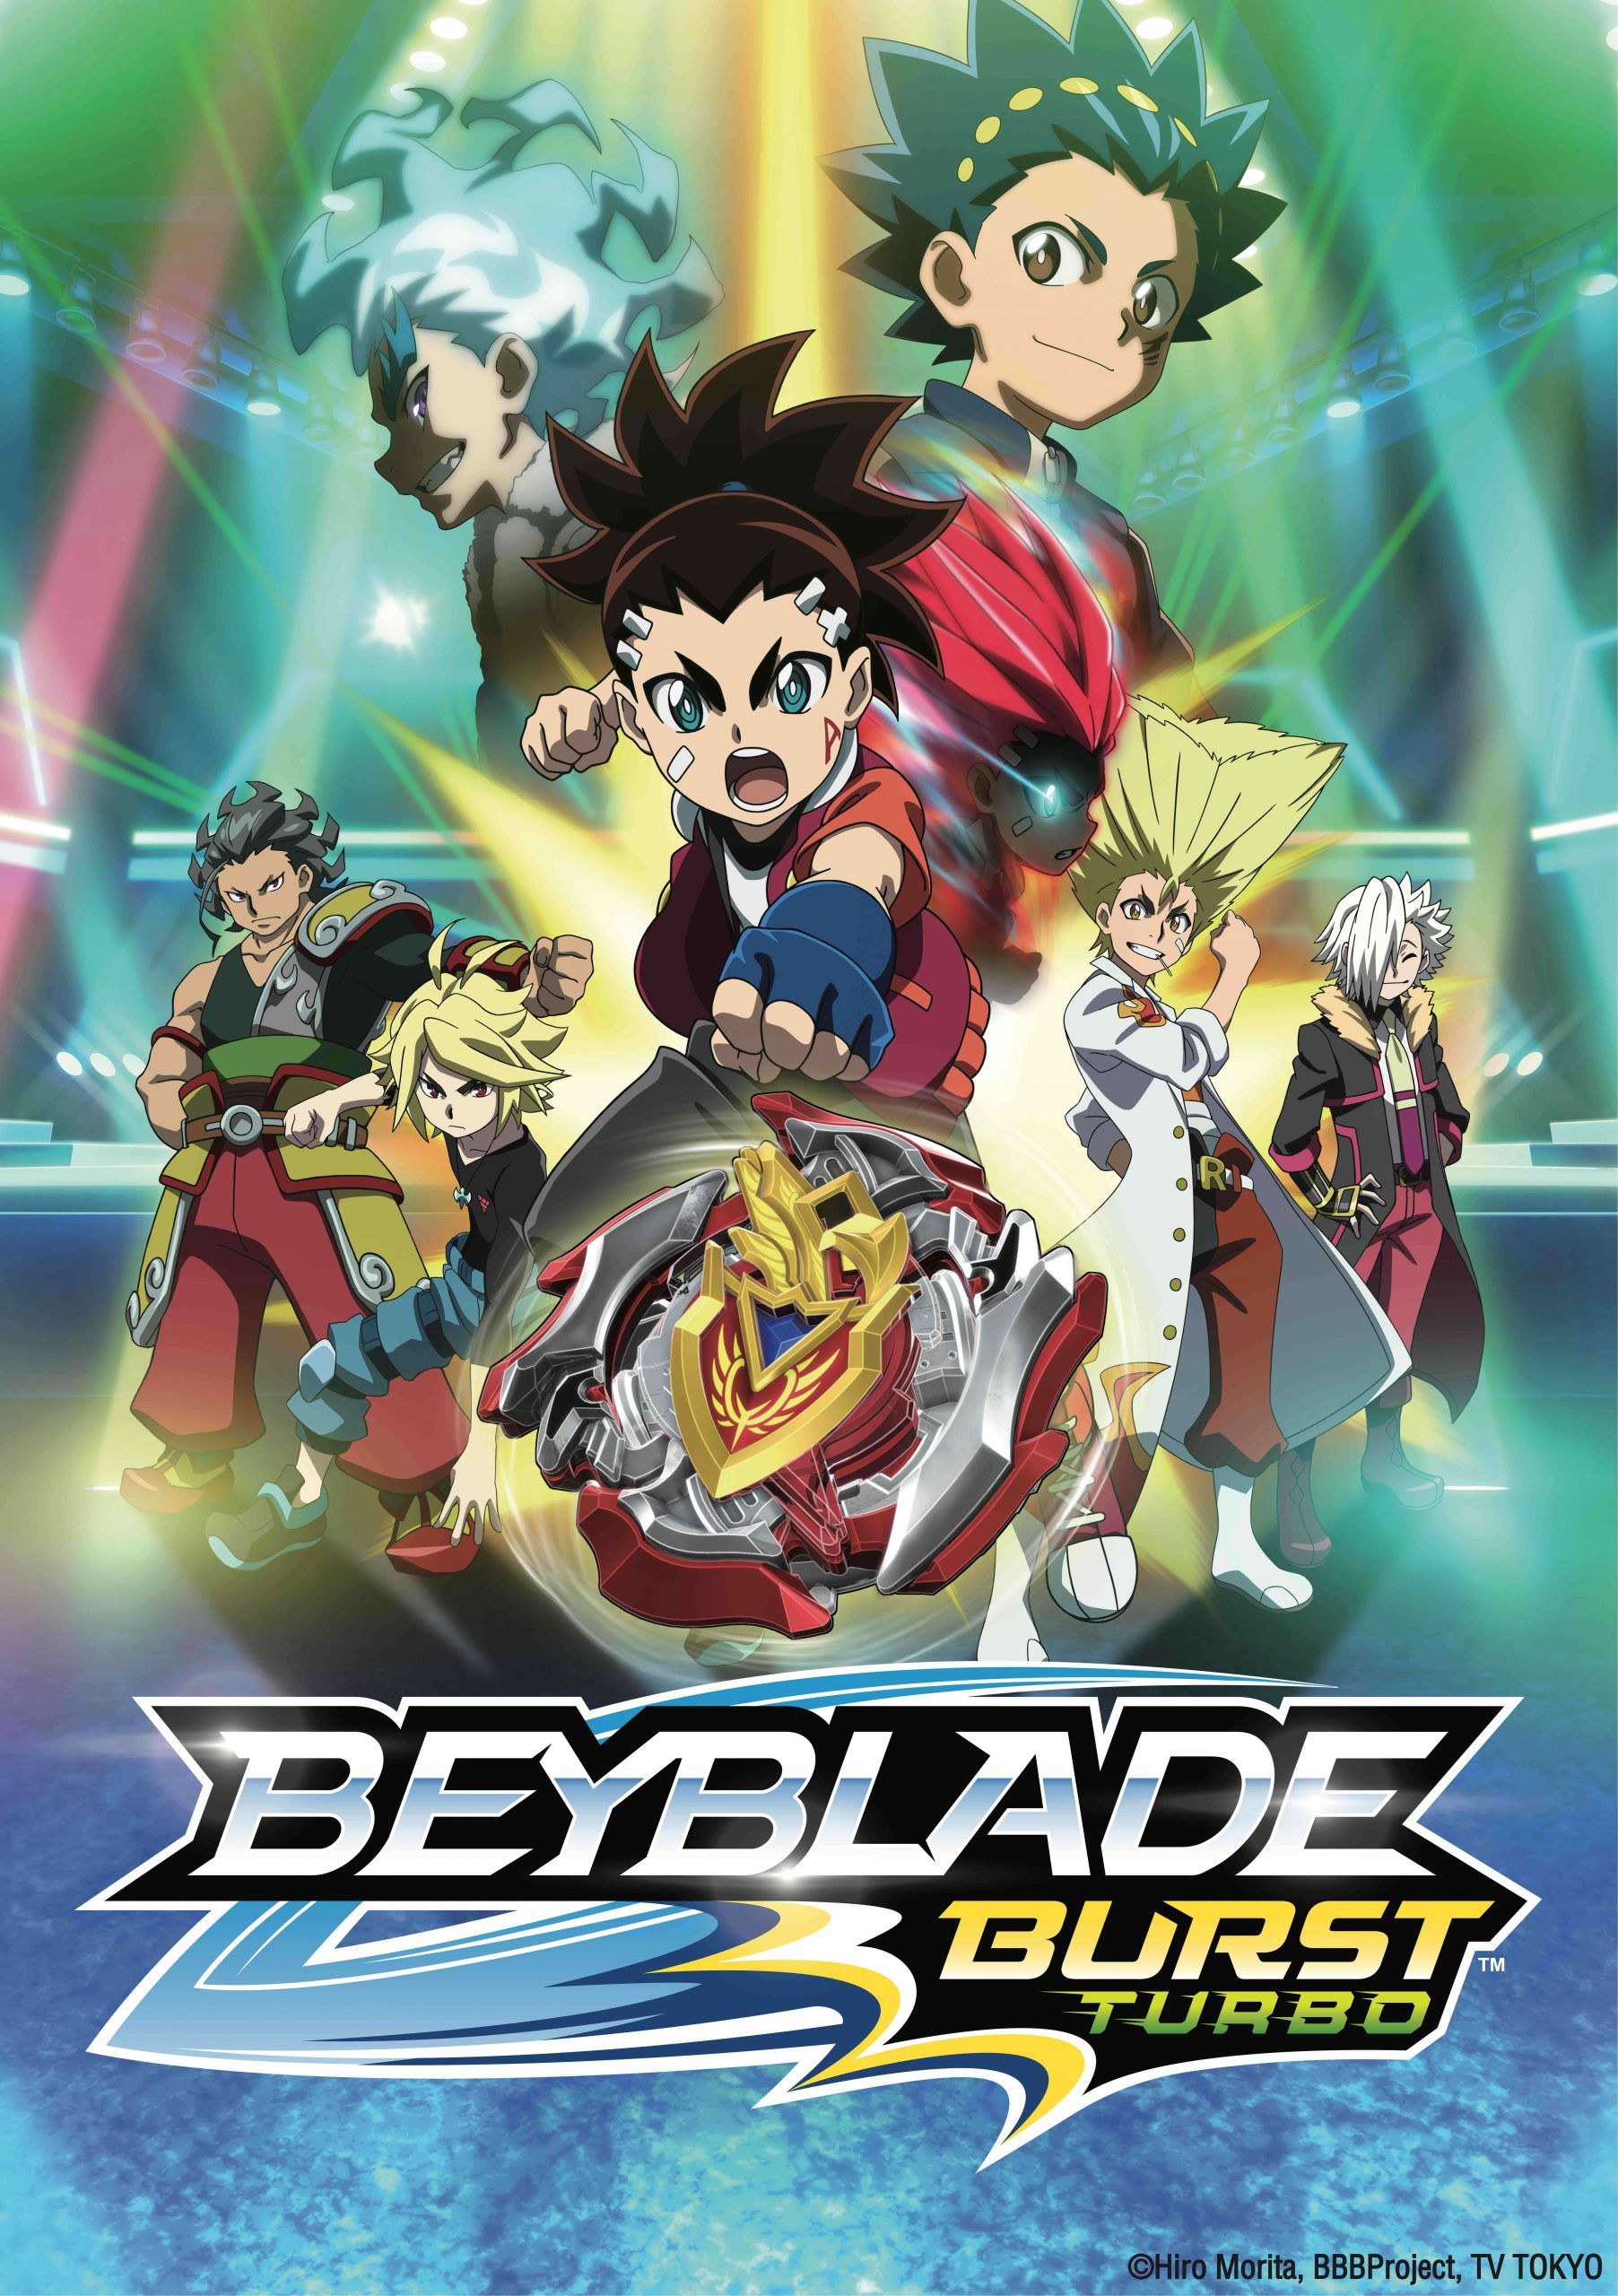 Beyblade Burst Turbo', the third season of Beyblade's 3rd Generation launches on Marvel HQ in India Asia Plus